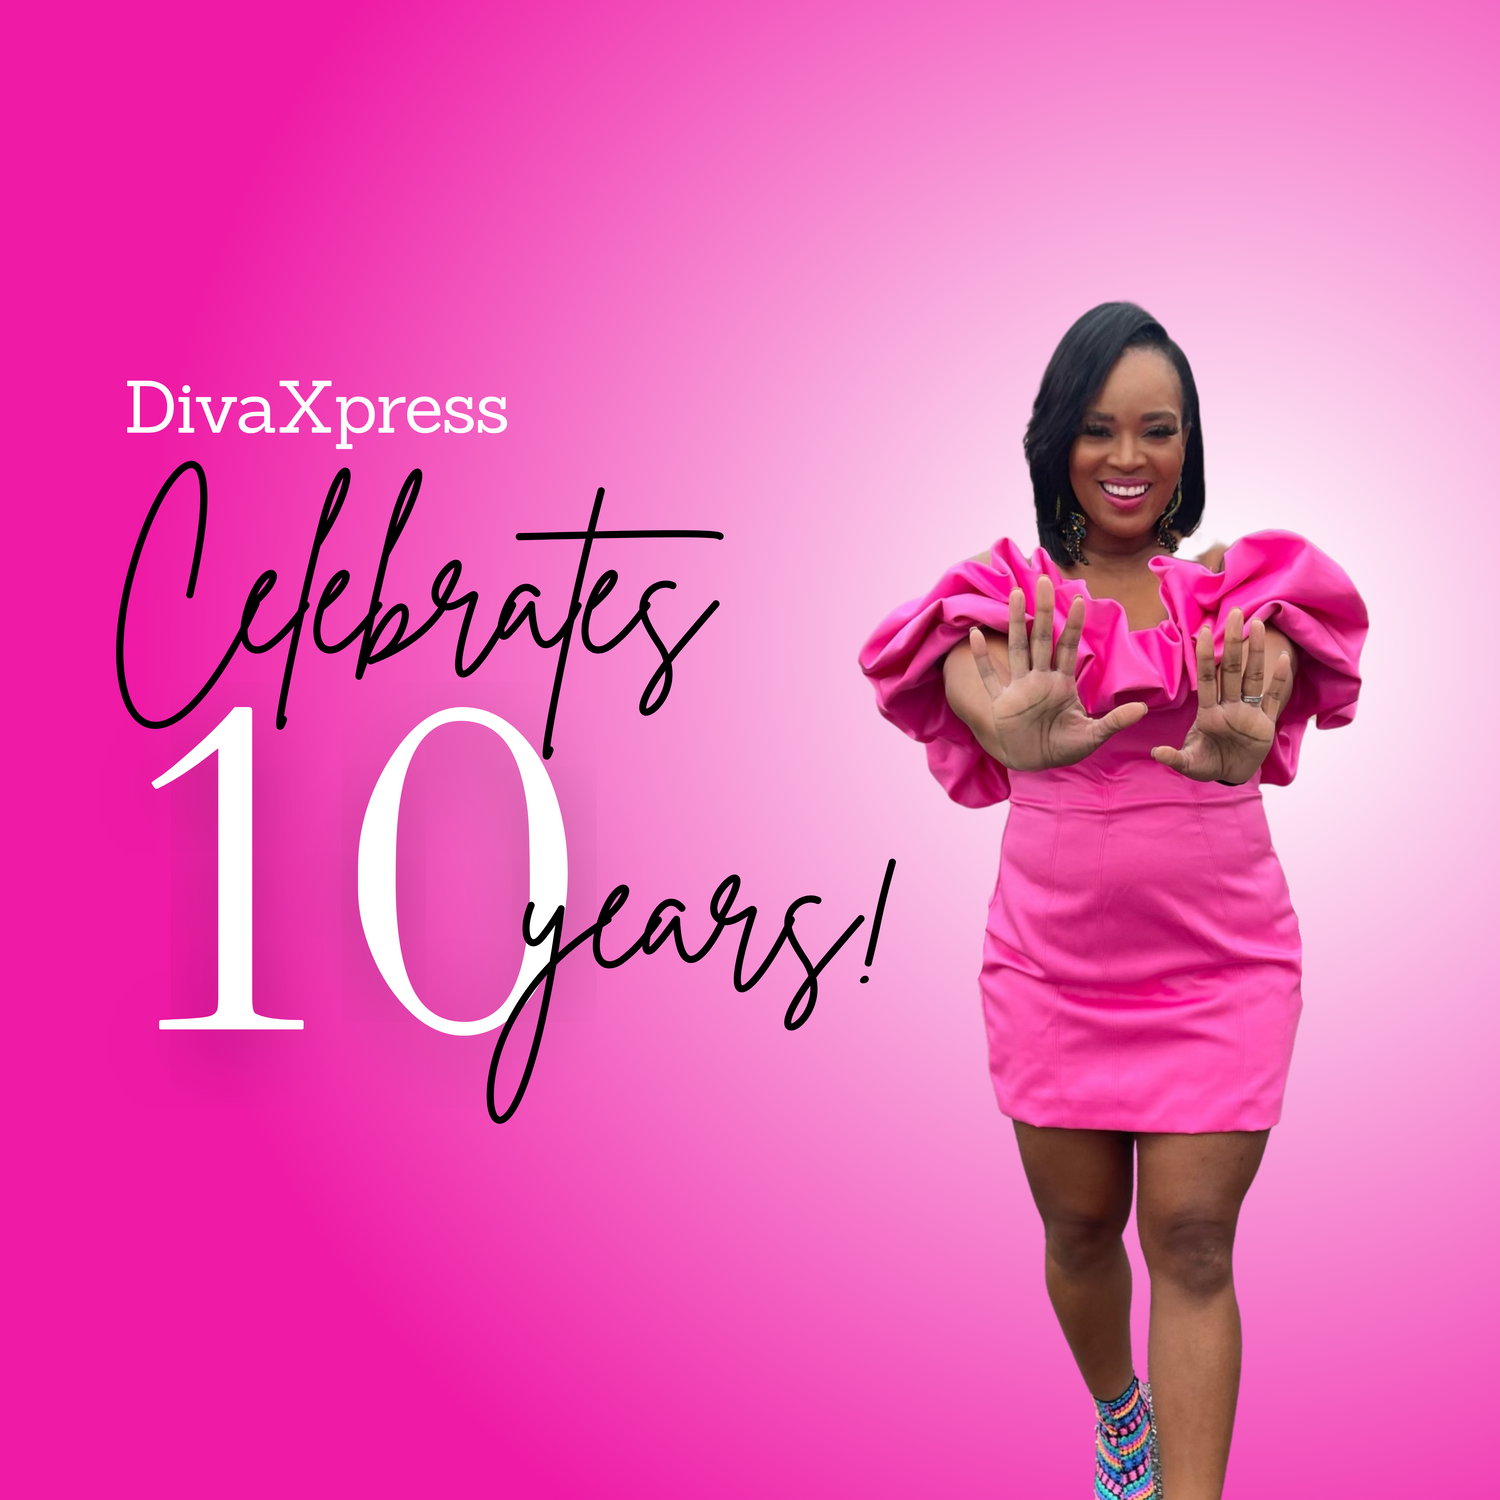 DivaXpress Celebrates 10 Years in Business